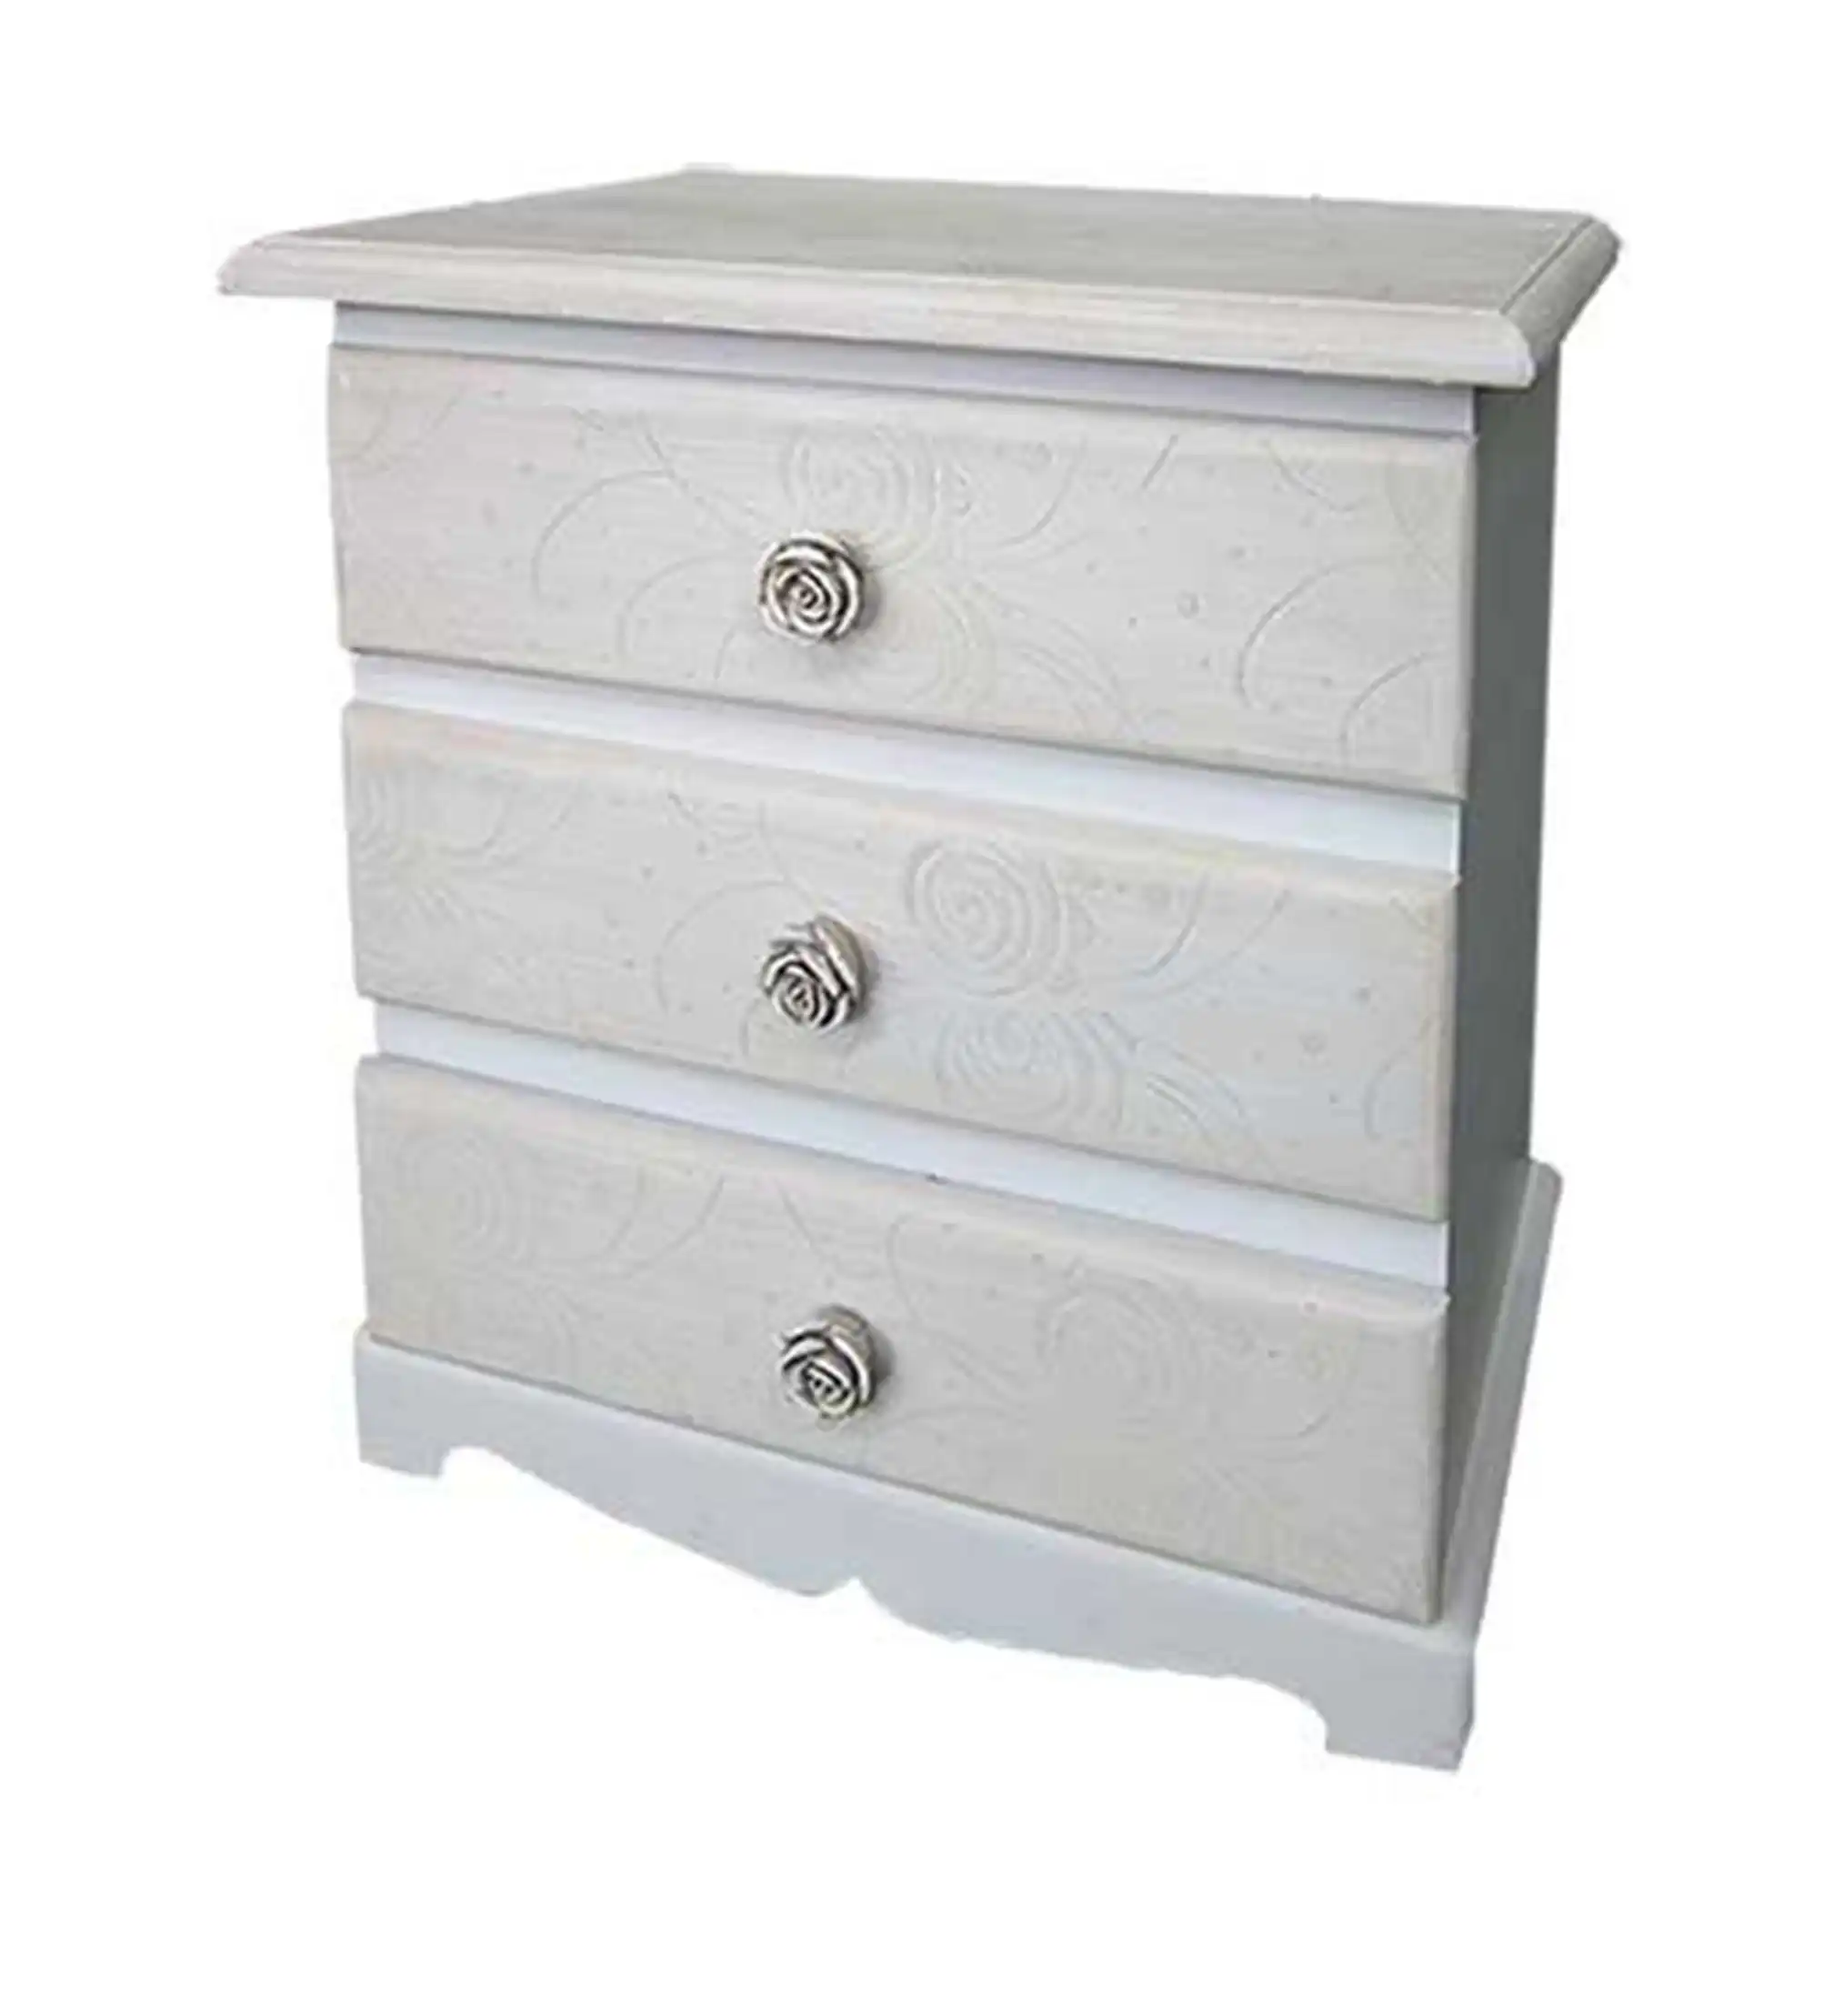 Bedside with 3 drawers - popular handicrafts